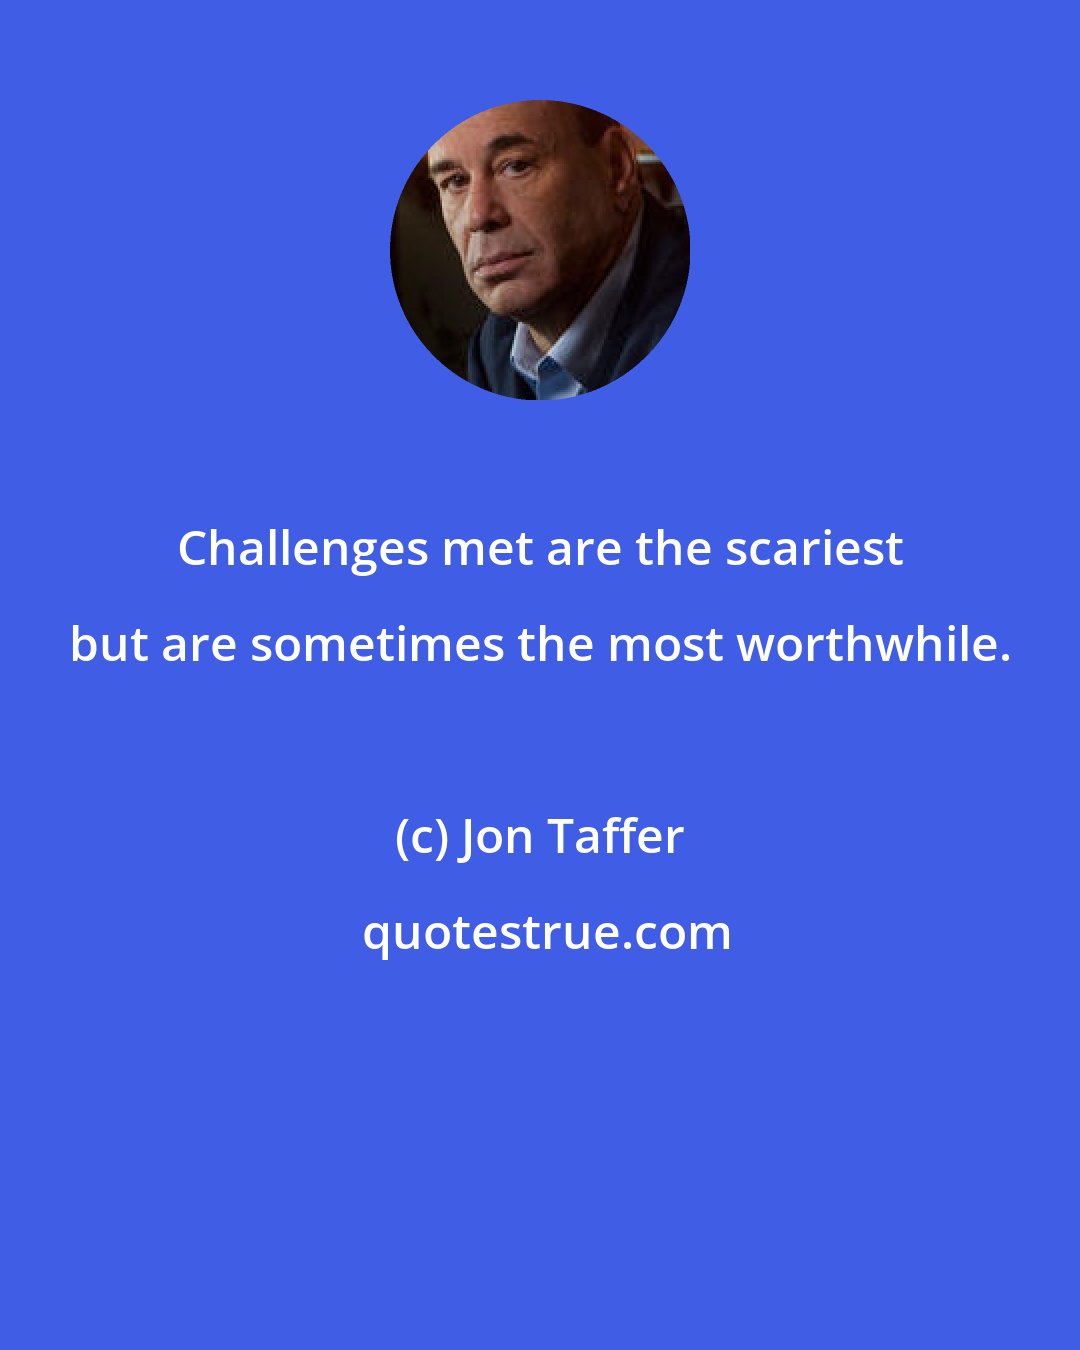 Jon Taffer: Challenges met are the scariest but are sometimes the most worthwhile.